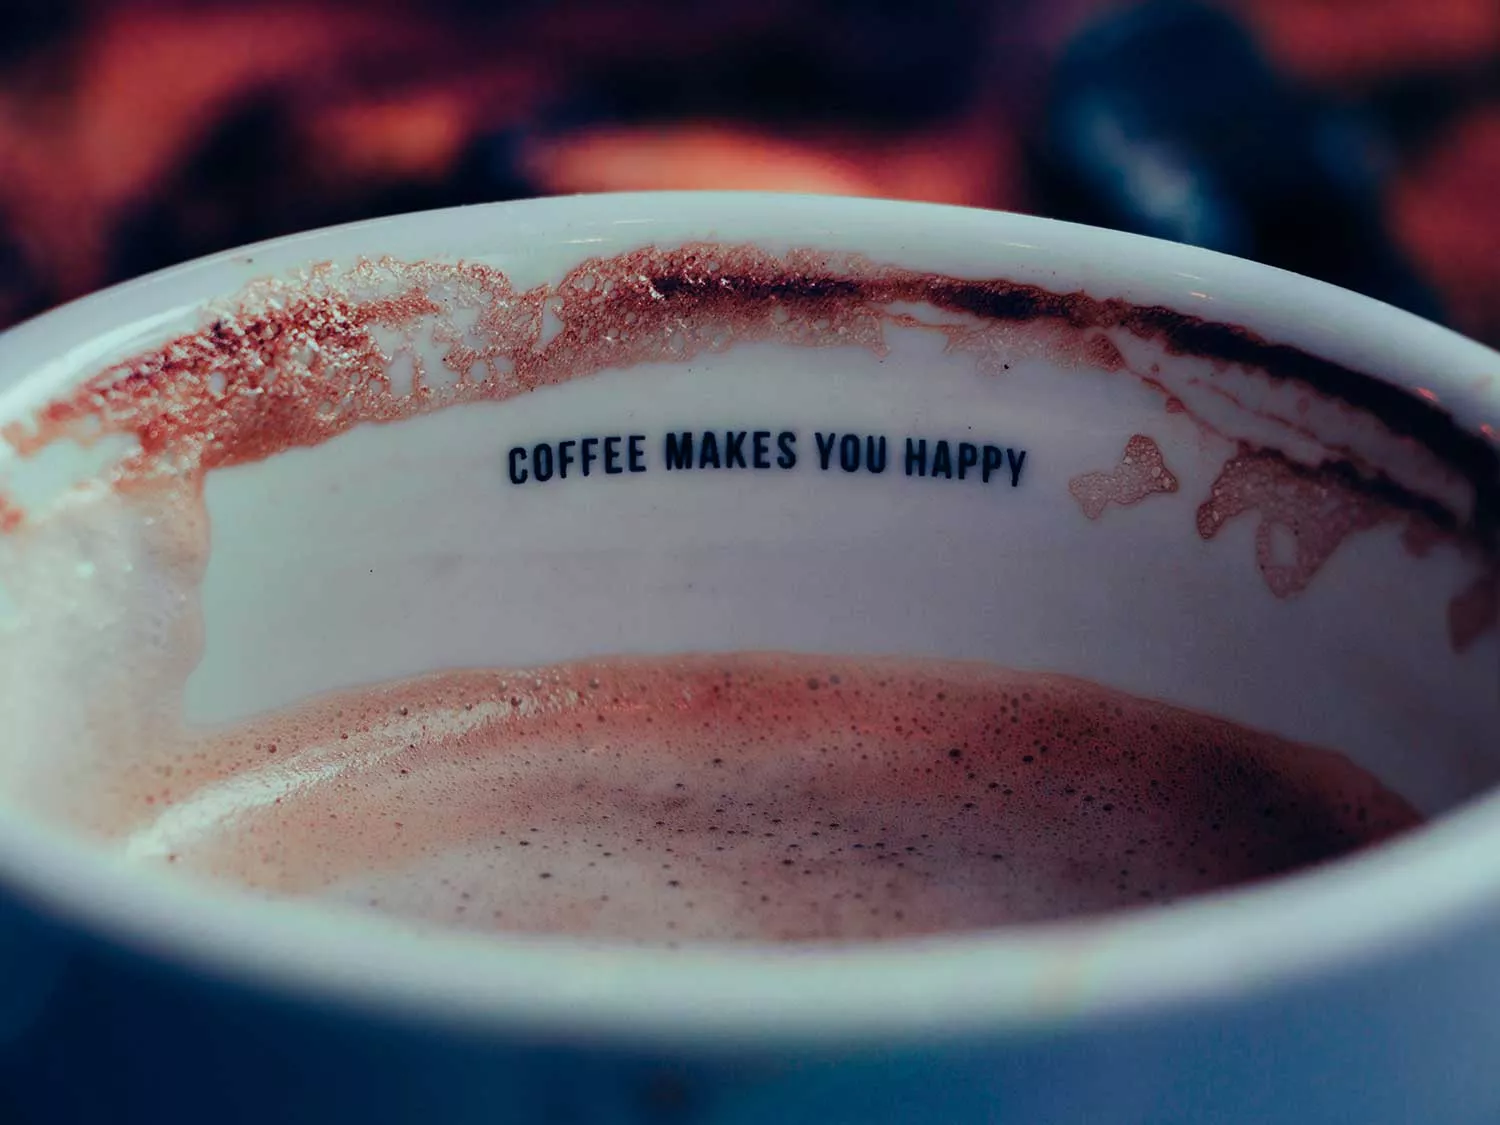 Coffee makes you happy.